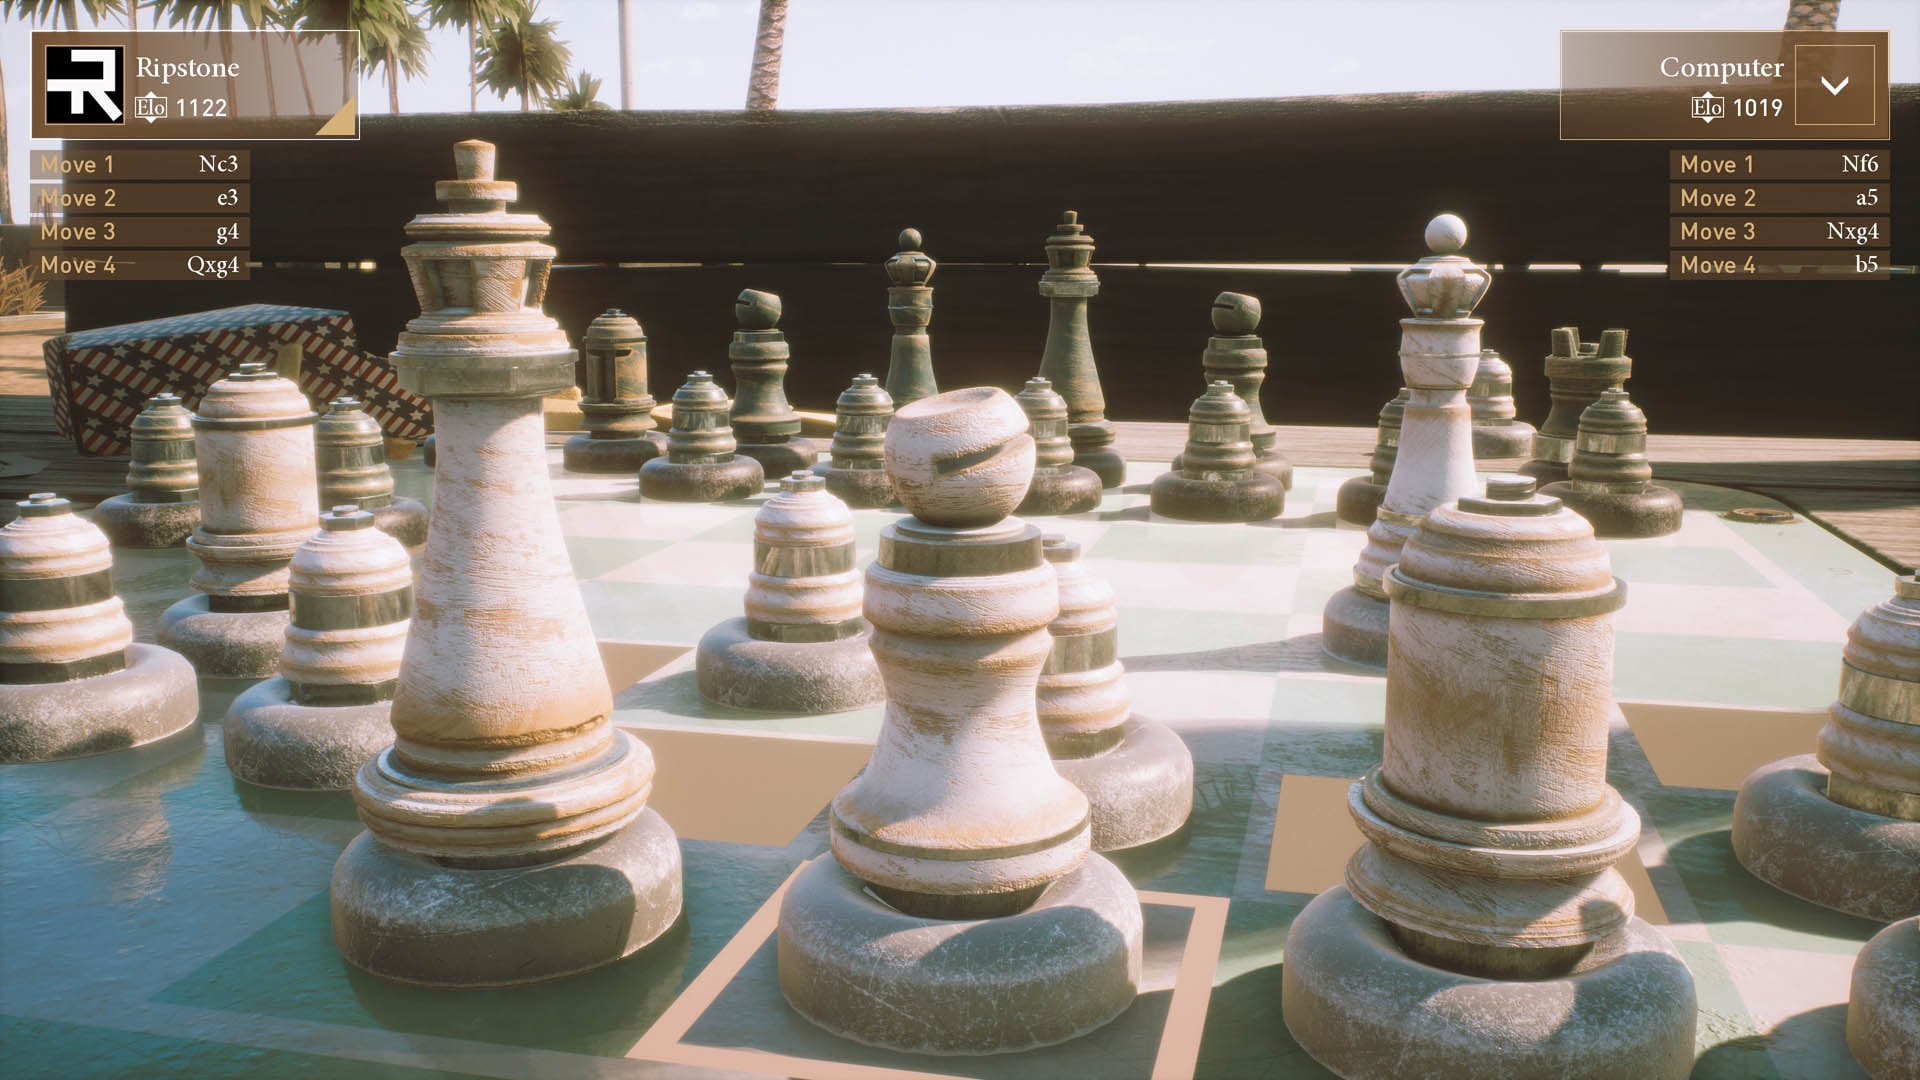 Chess Ultra: Santa Monica Game Pack official promotional image